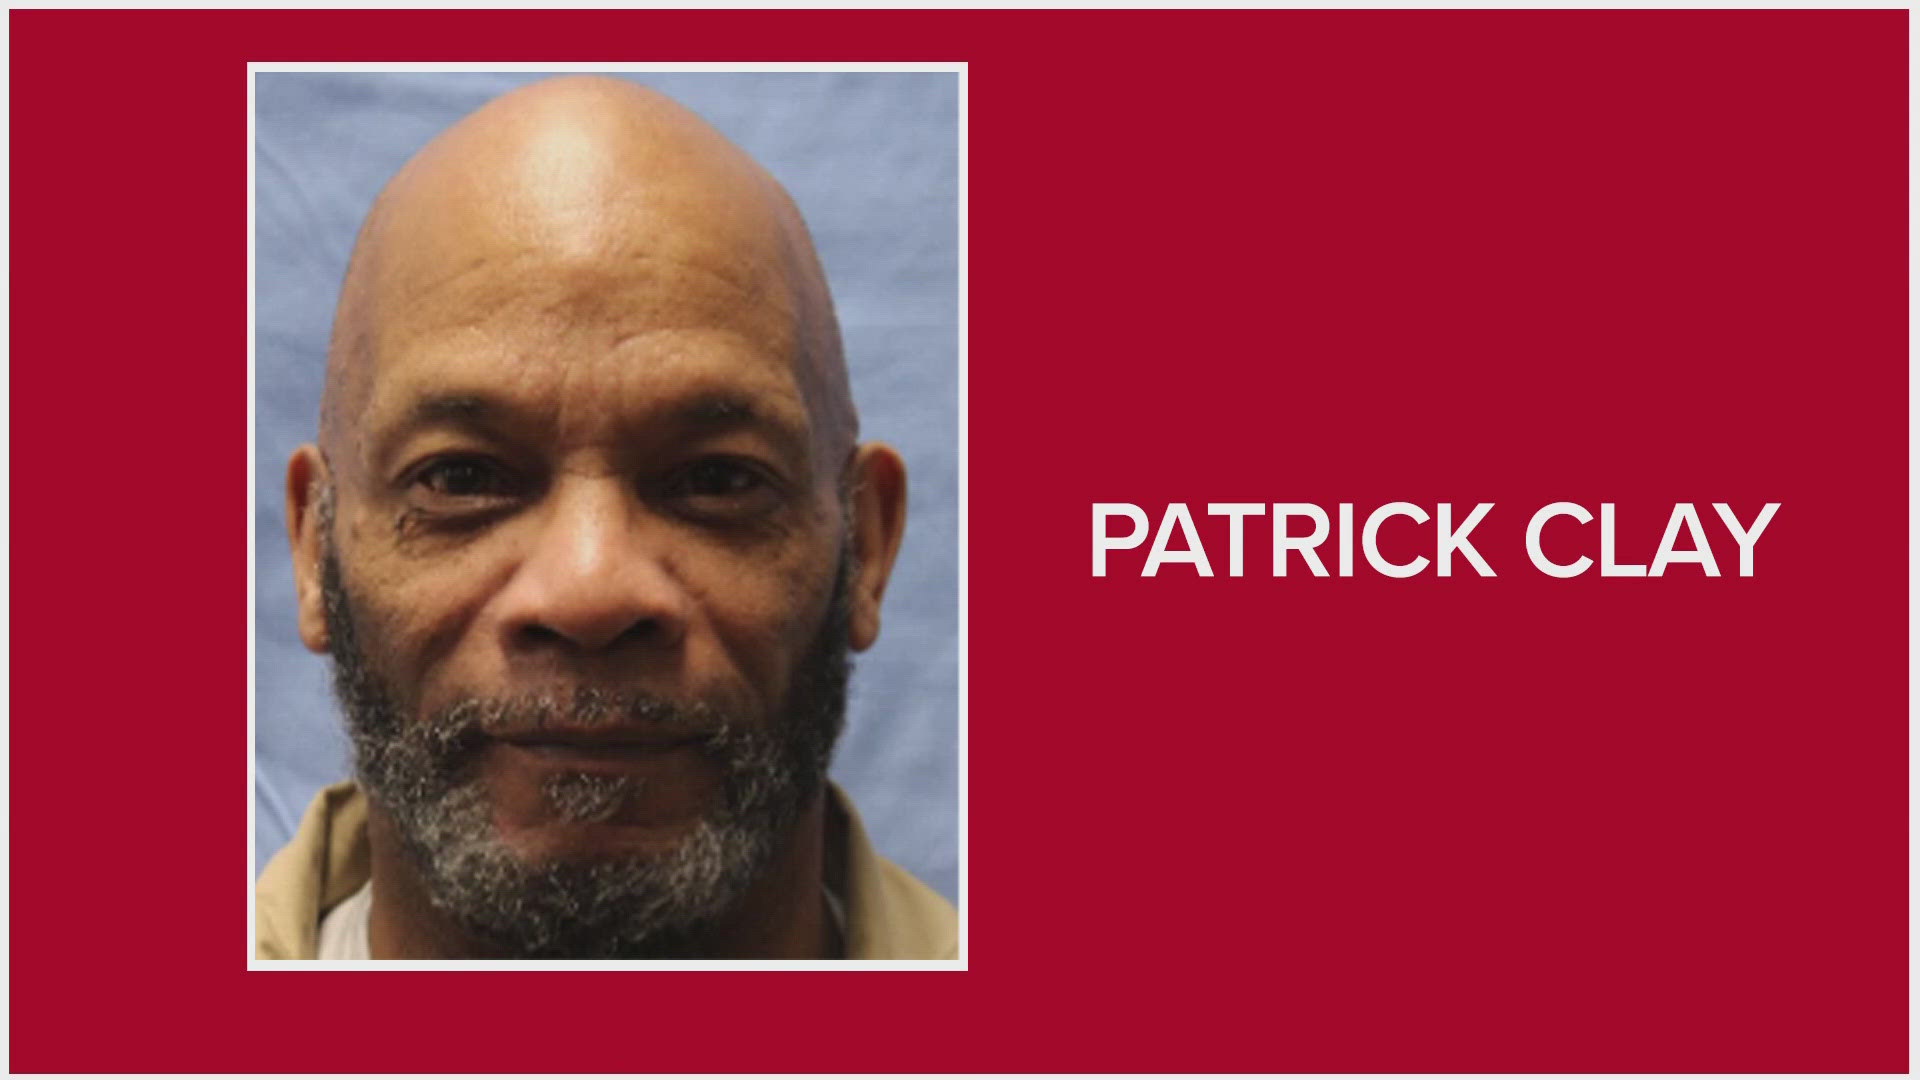 The Department of Corrections and Monroe Police Department are searching for Patrick Lester Clay, who escaped from the Monroe Correctional Complex.